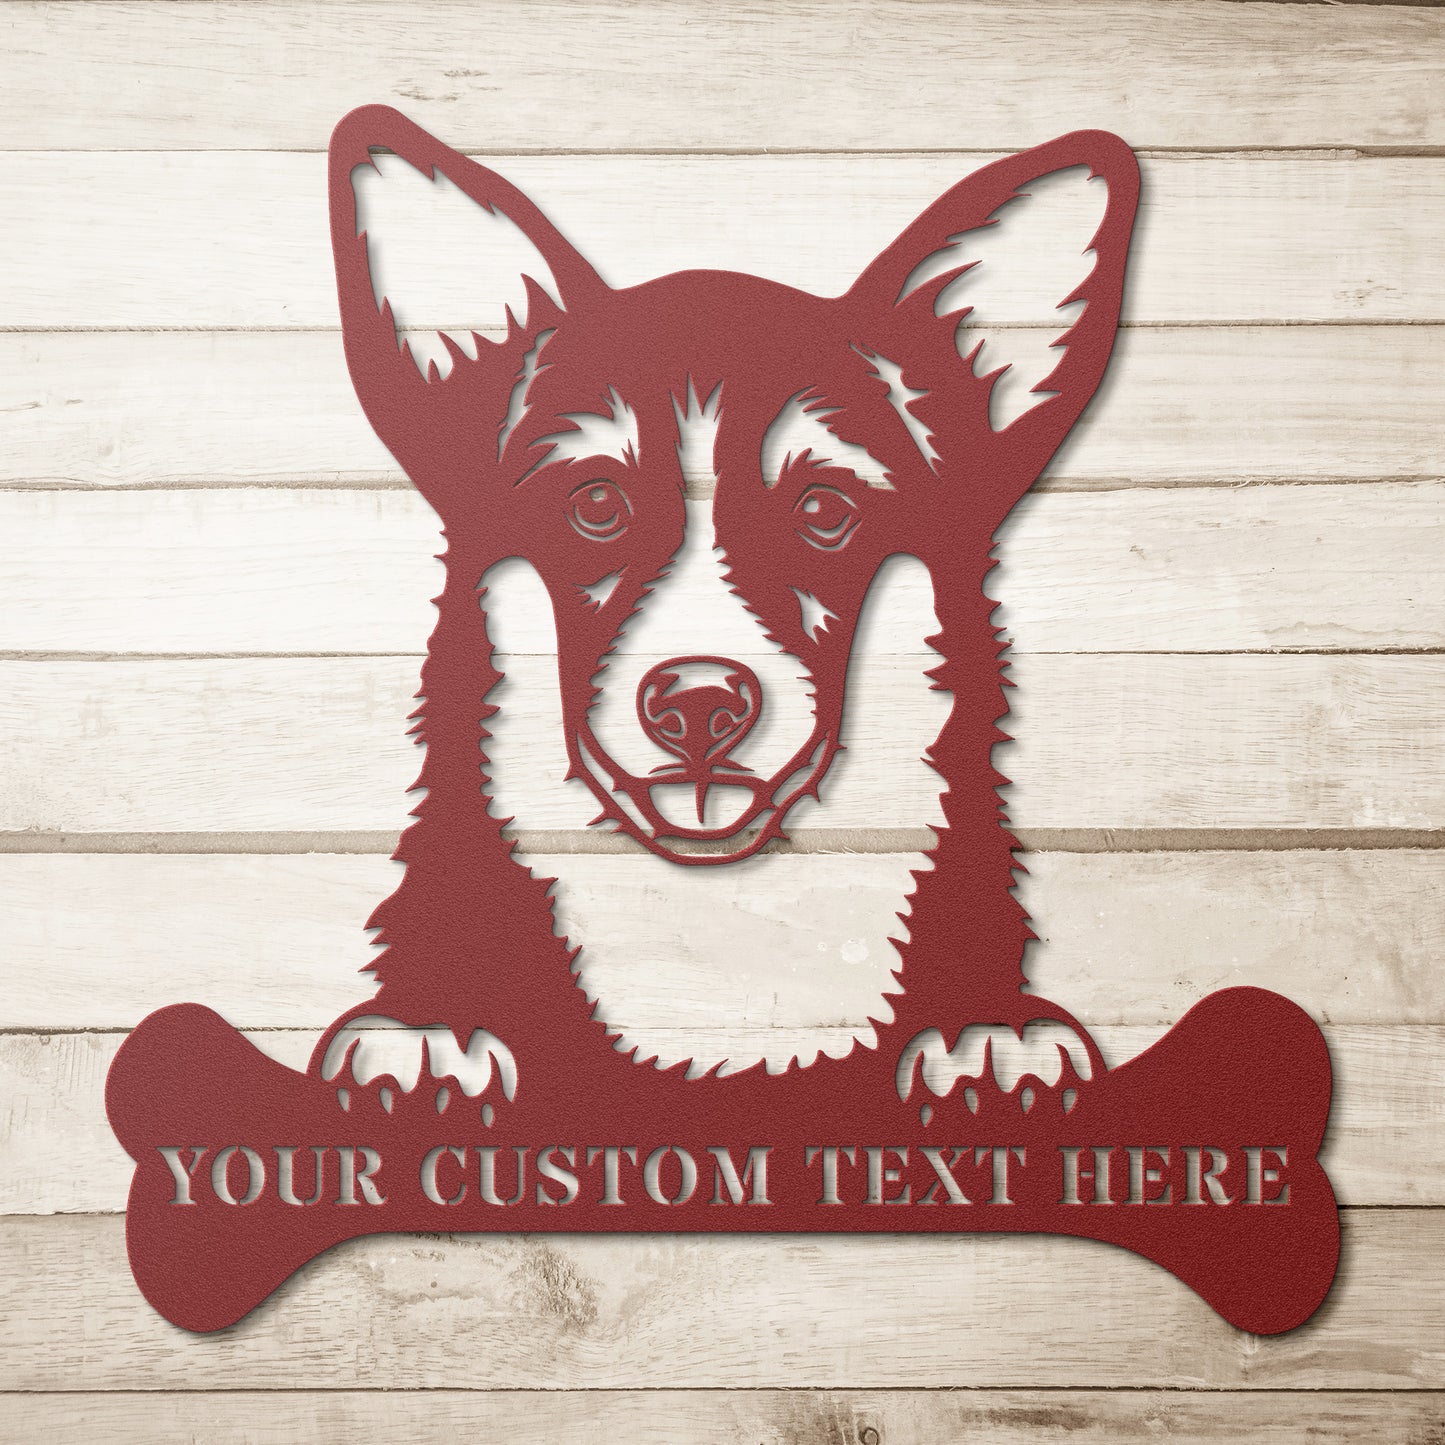 Personalized Corgi Name Metal Sign. Customizable Dog Owner Wall Decor Gift. Border Collie Portrait Yard Sign. Dog House Name Sign. Dog Lover